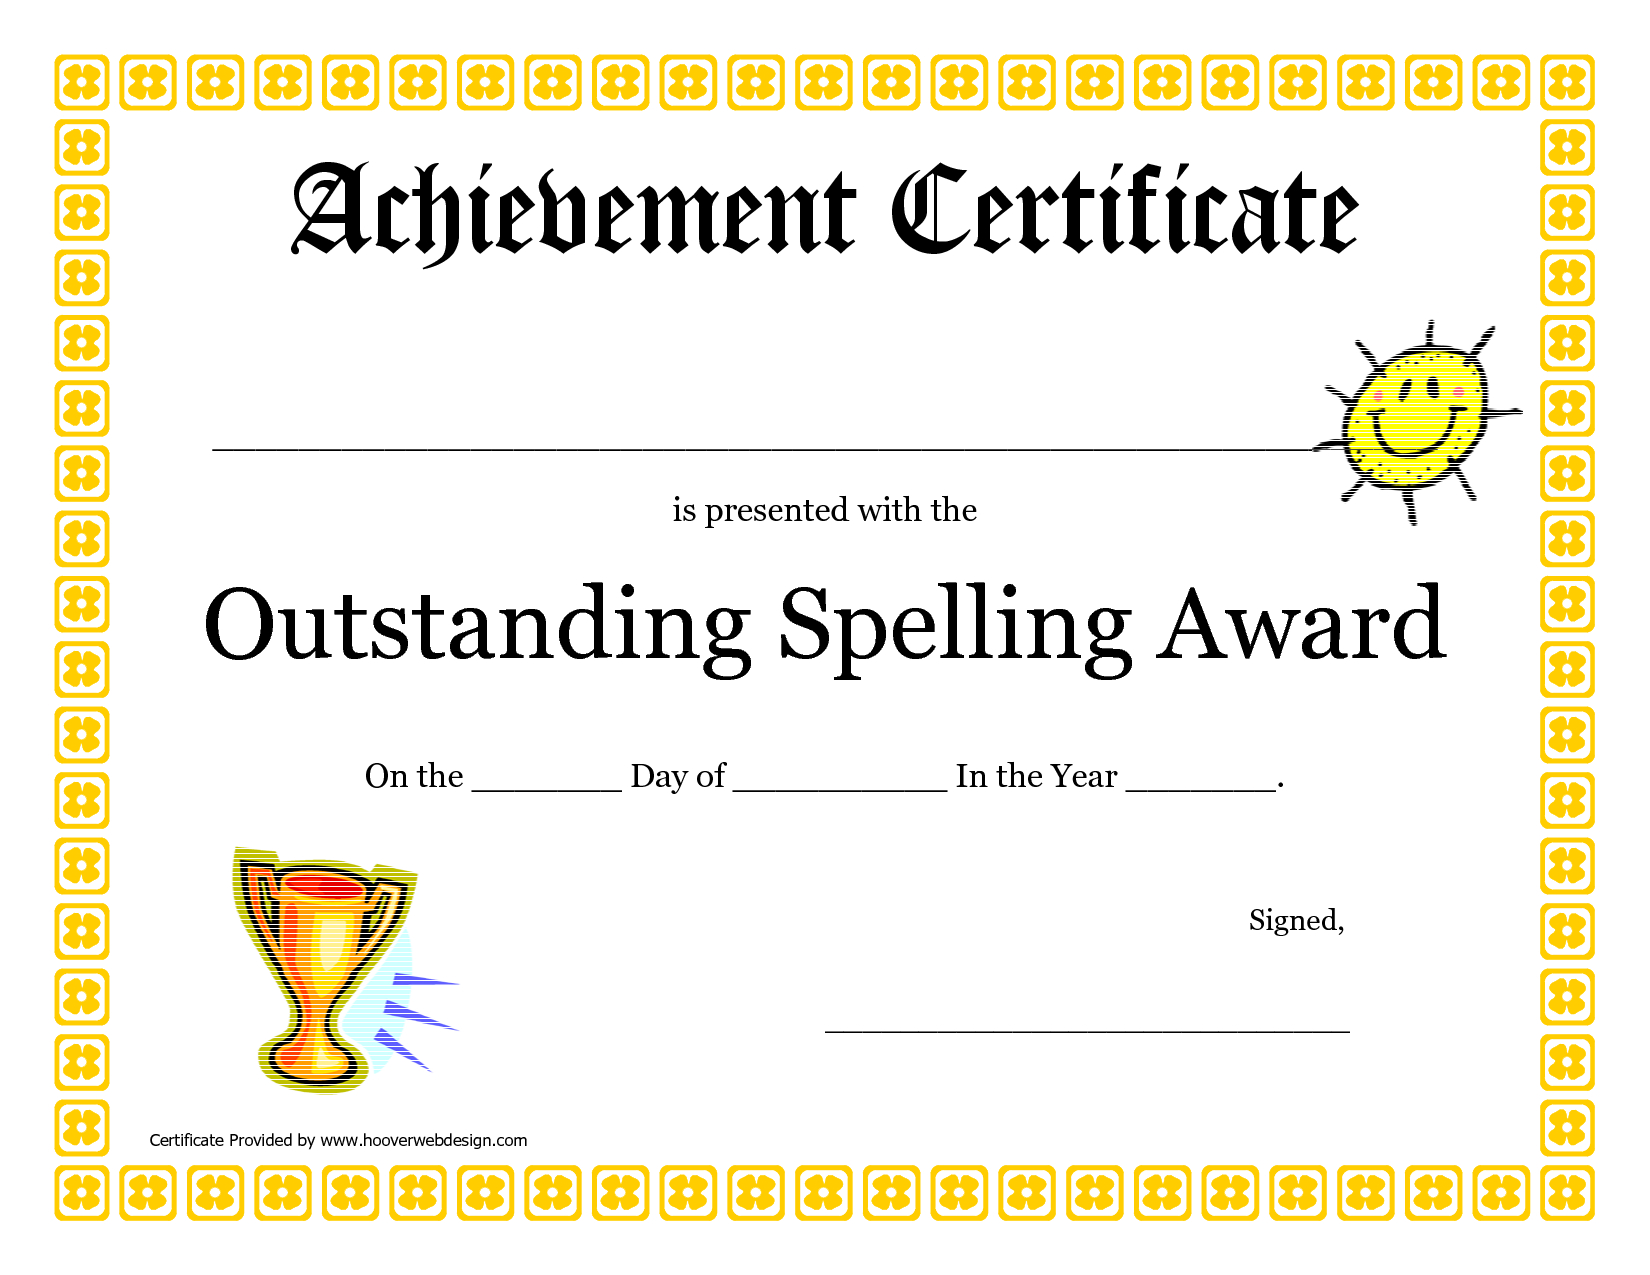 Outstanding Spelling Award Printable Certificate Pdf Picture Inside Classroom Certificates Templates